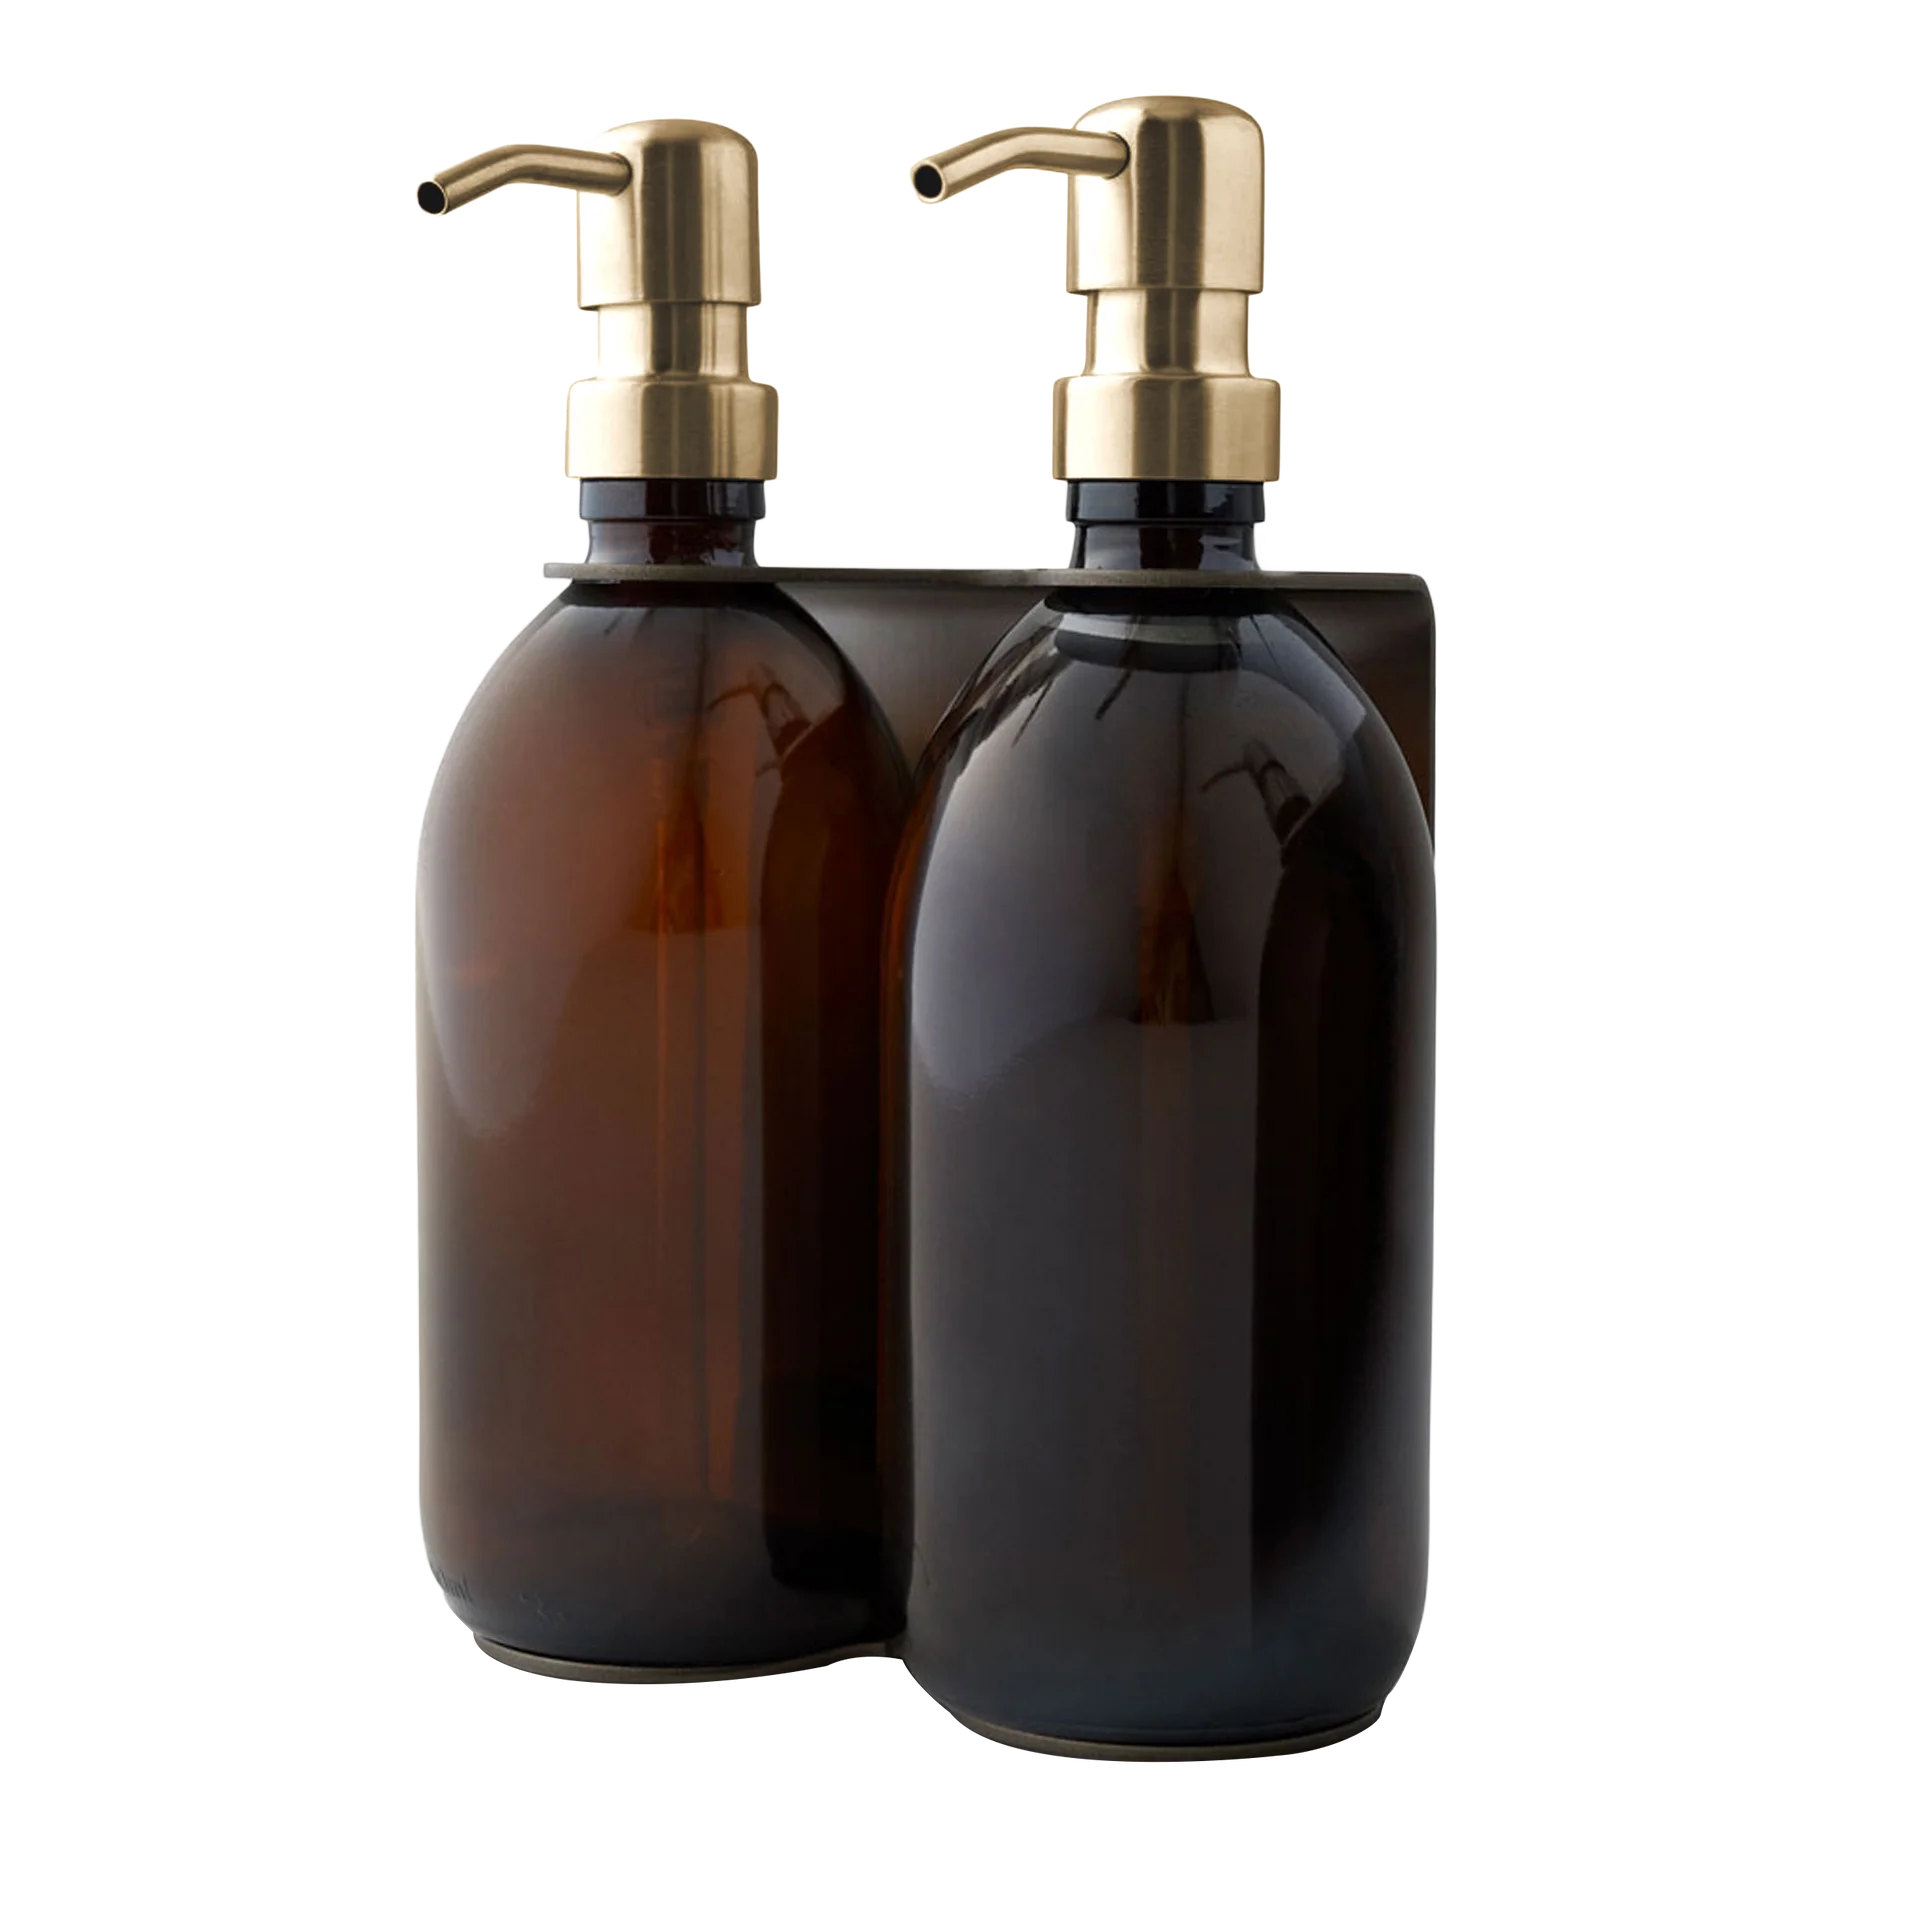 Satin Silver Double Wall Mounted Soap Dispenser with amber bottles and gold pumps